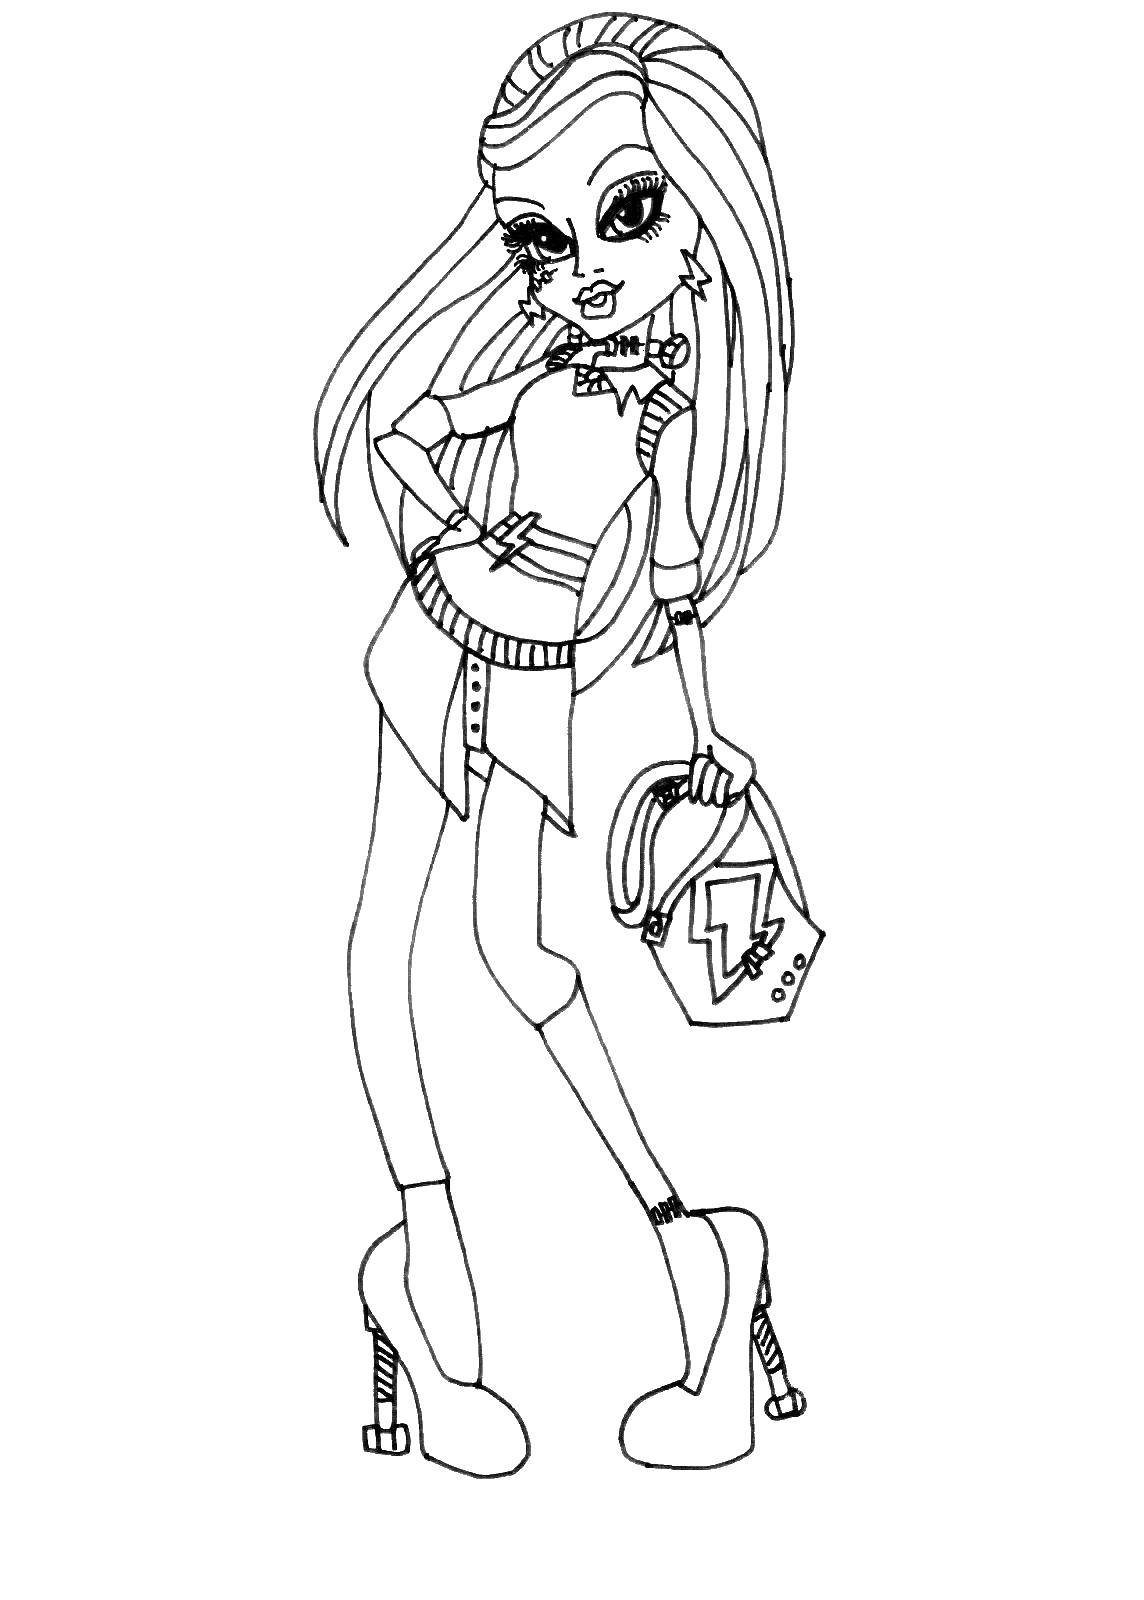 Coloring Stylish girl. Category monster high. Tags:  Monster High.